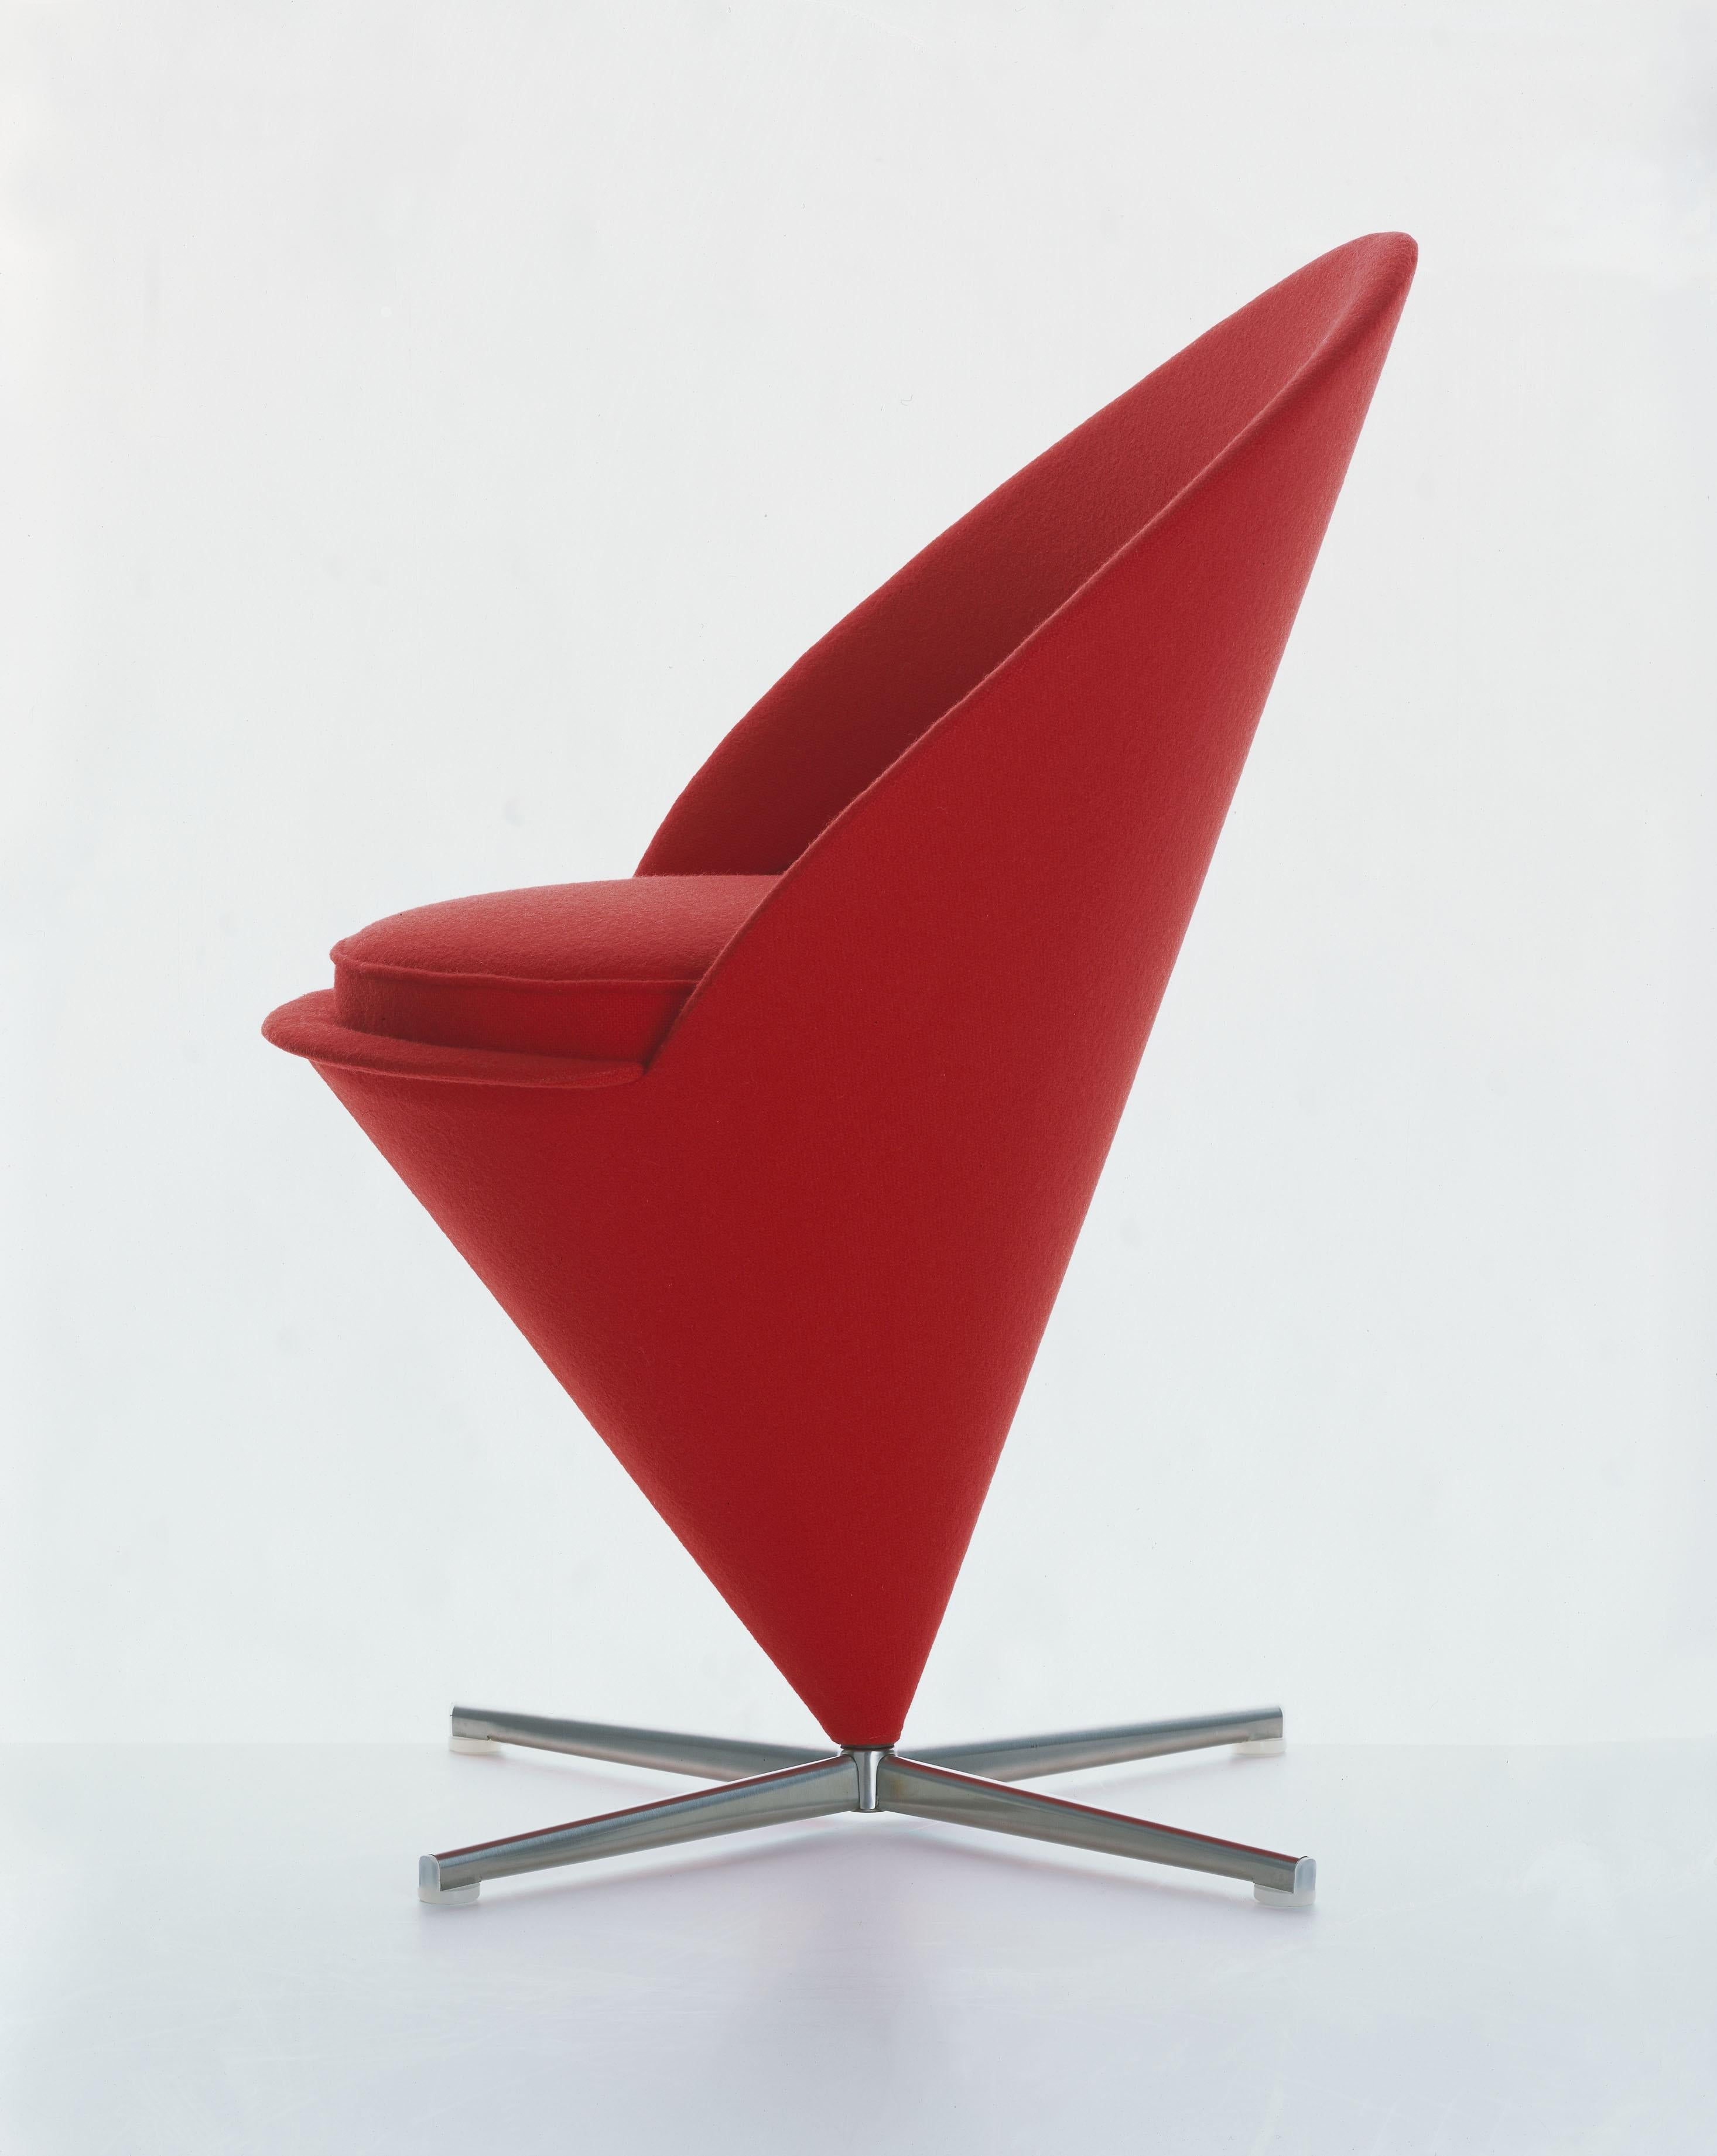 These items are currently only available in the United States.

Originally designed for a Danish restaurant, the Cone chair takes its shape from the classic geometric figure for which it is named. The cone-shaped seat is mounted at its point on a